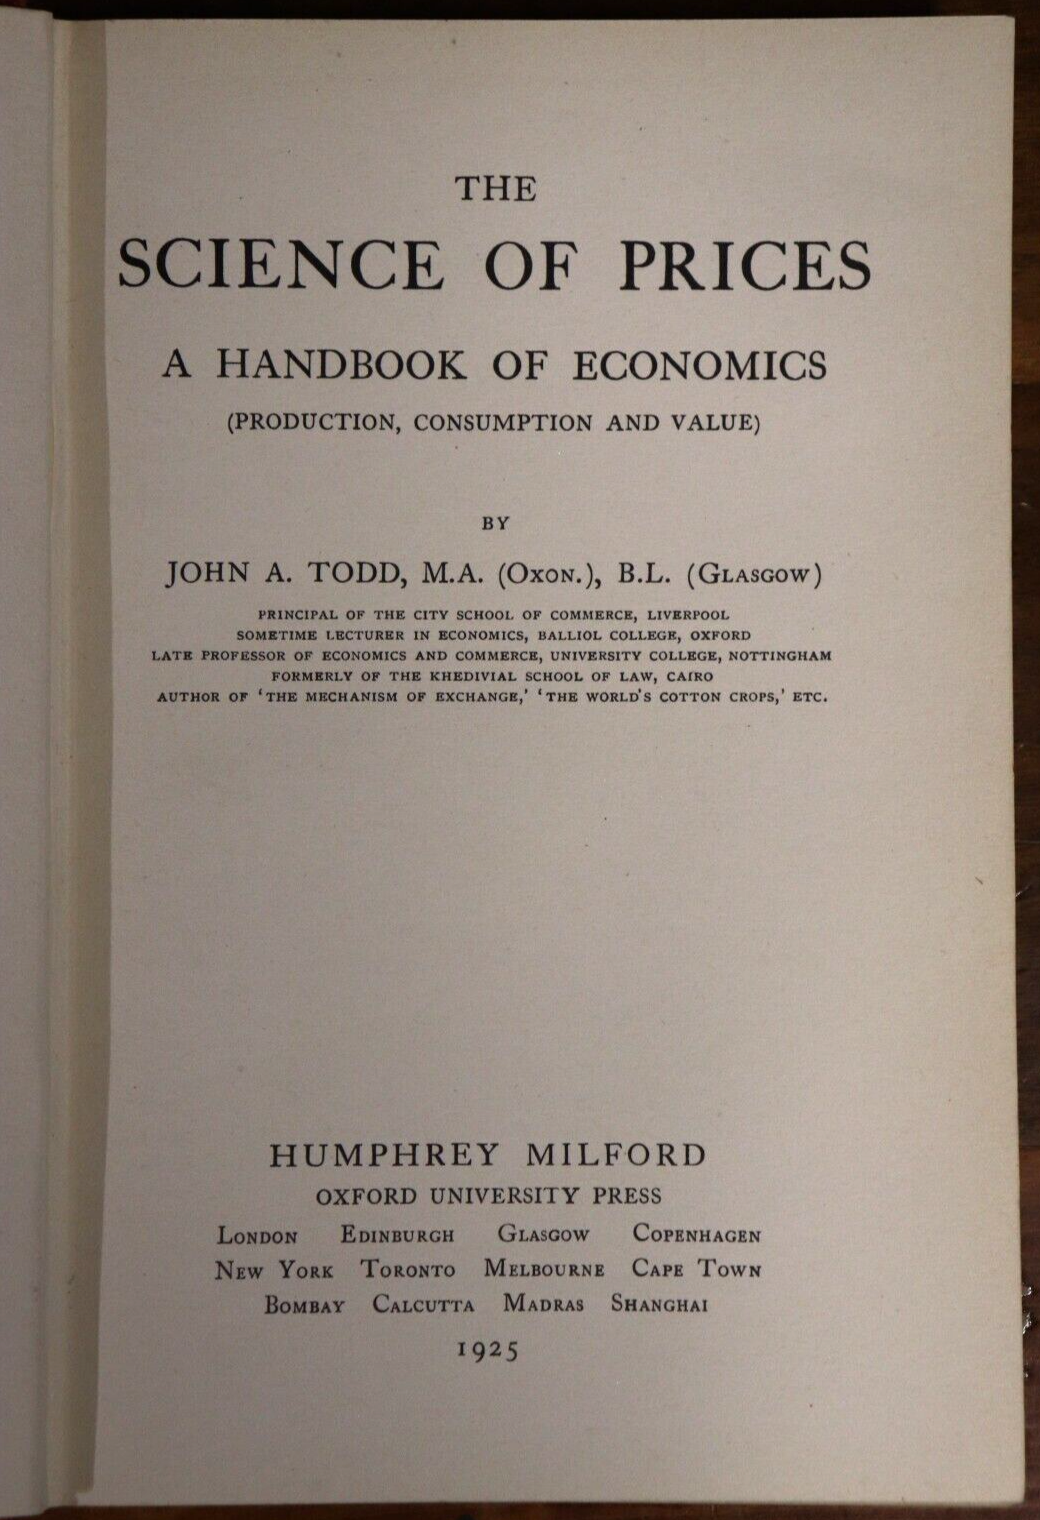 The Science Of Prices by John A. Todd - 1925 - 1st Edition Economics Book